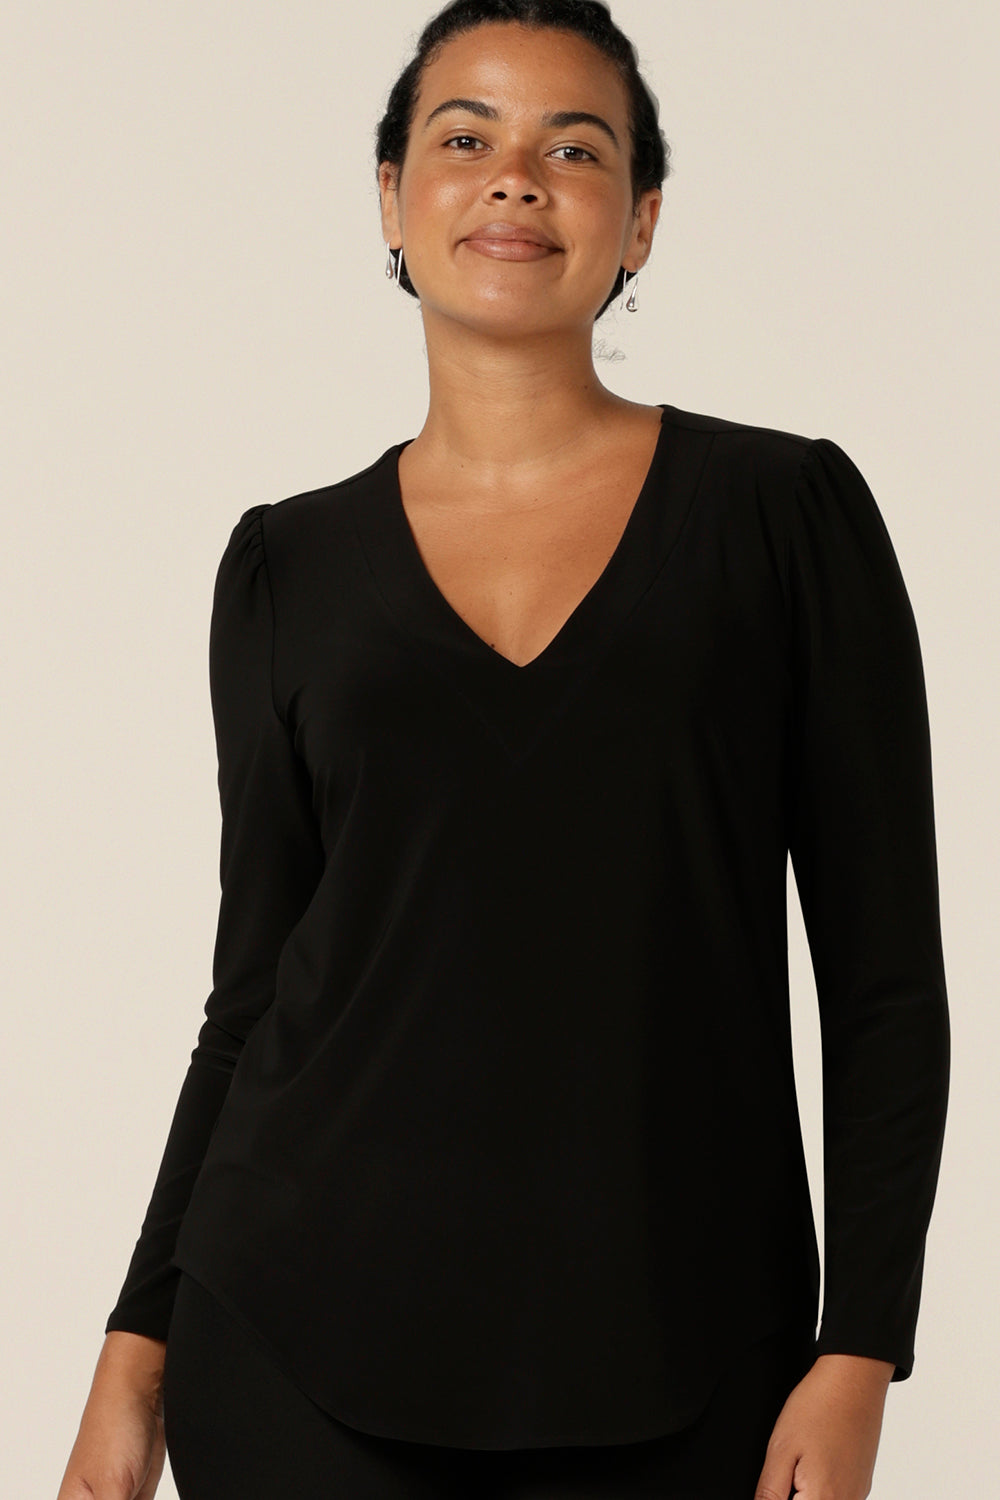 A size 12, curvy woman wears a long sleeve, V neck top in black jersey. A comfortable top for work or casual wear, this classic women's top is made in Australia by Australia and New Zealand women's clothing company.